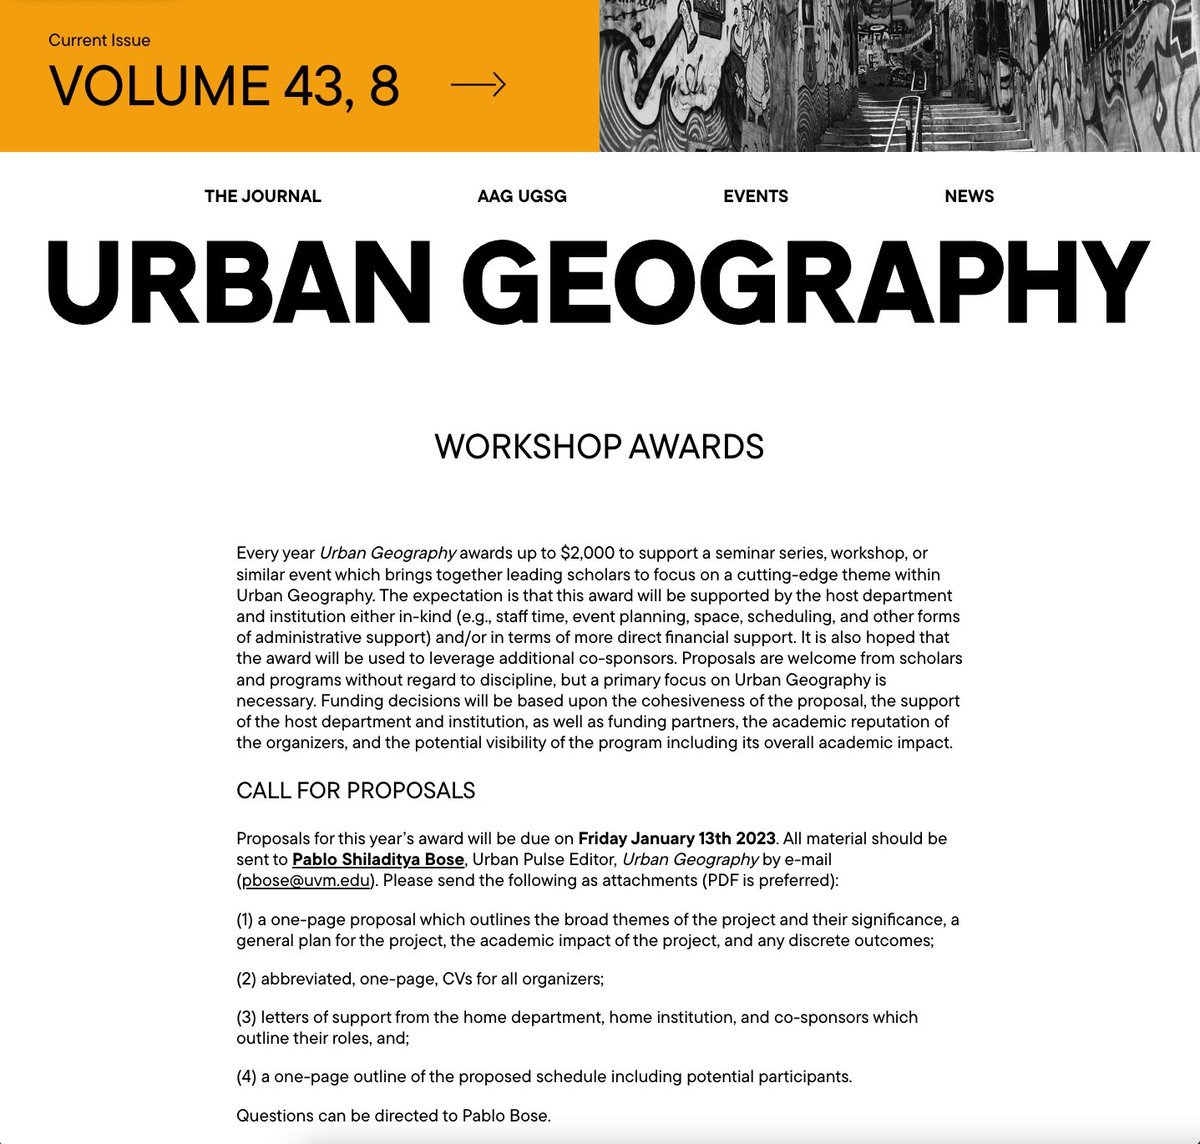 📣Call for Proposals📣 we are seeking proposals for the annual Urban Geography Workshop Award! The award is worth $2000 & will support you to bring together scholars working on a cutting-edge theme or pressing issue in urban geography. Get scheming! urbangeographyjournal.org/events/worksho…